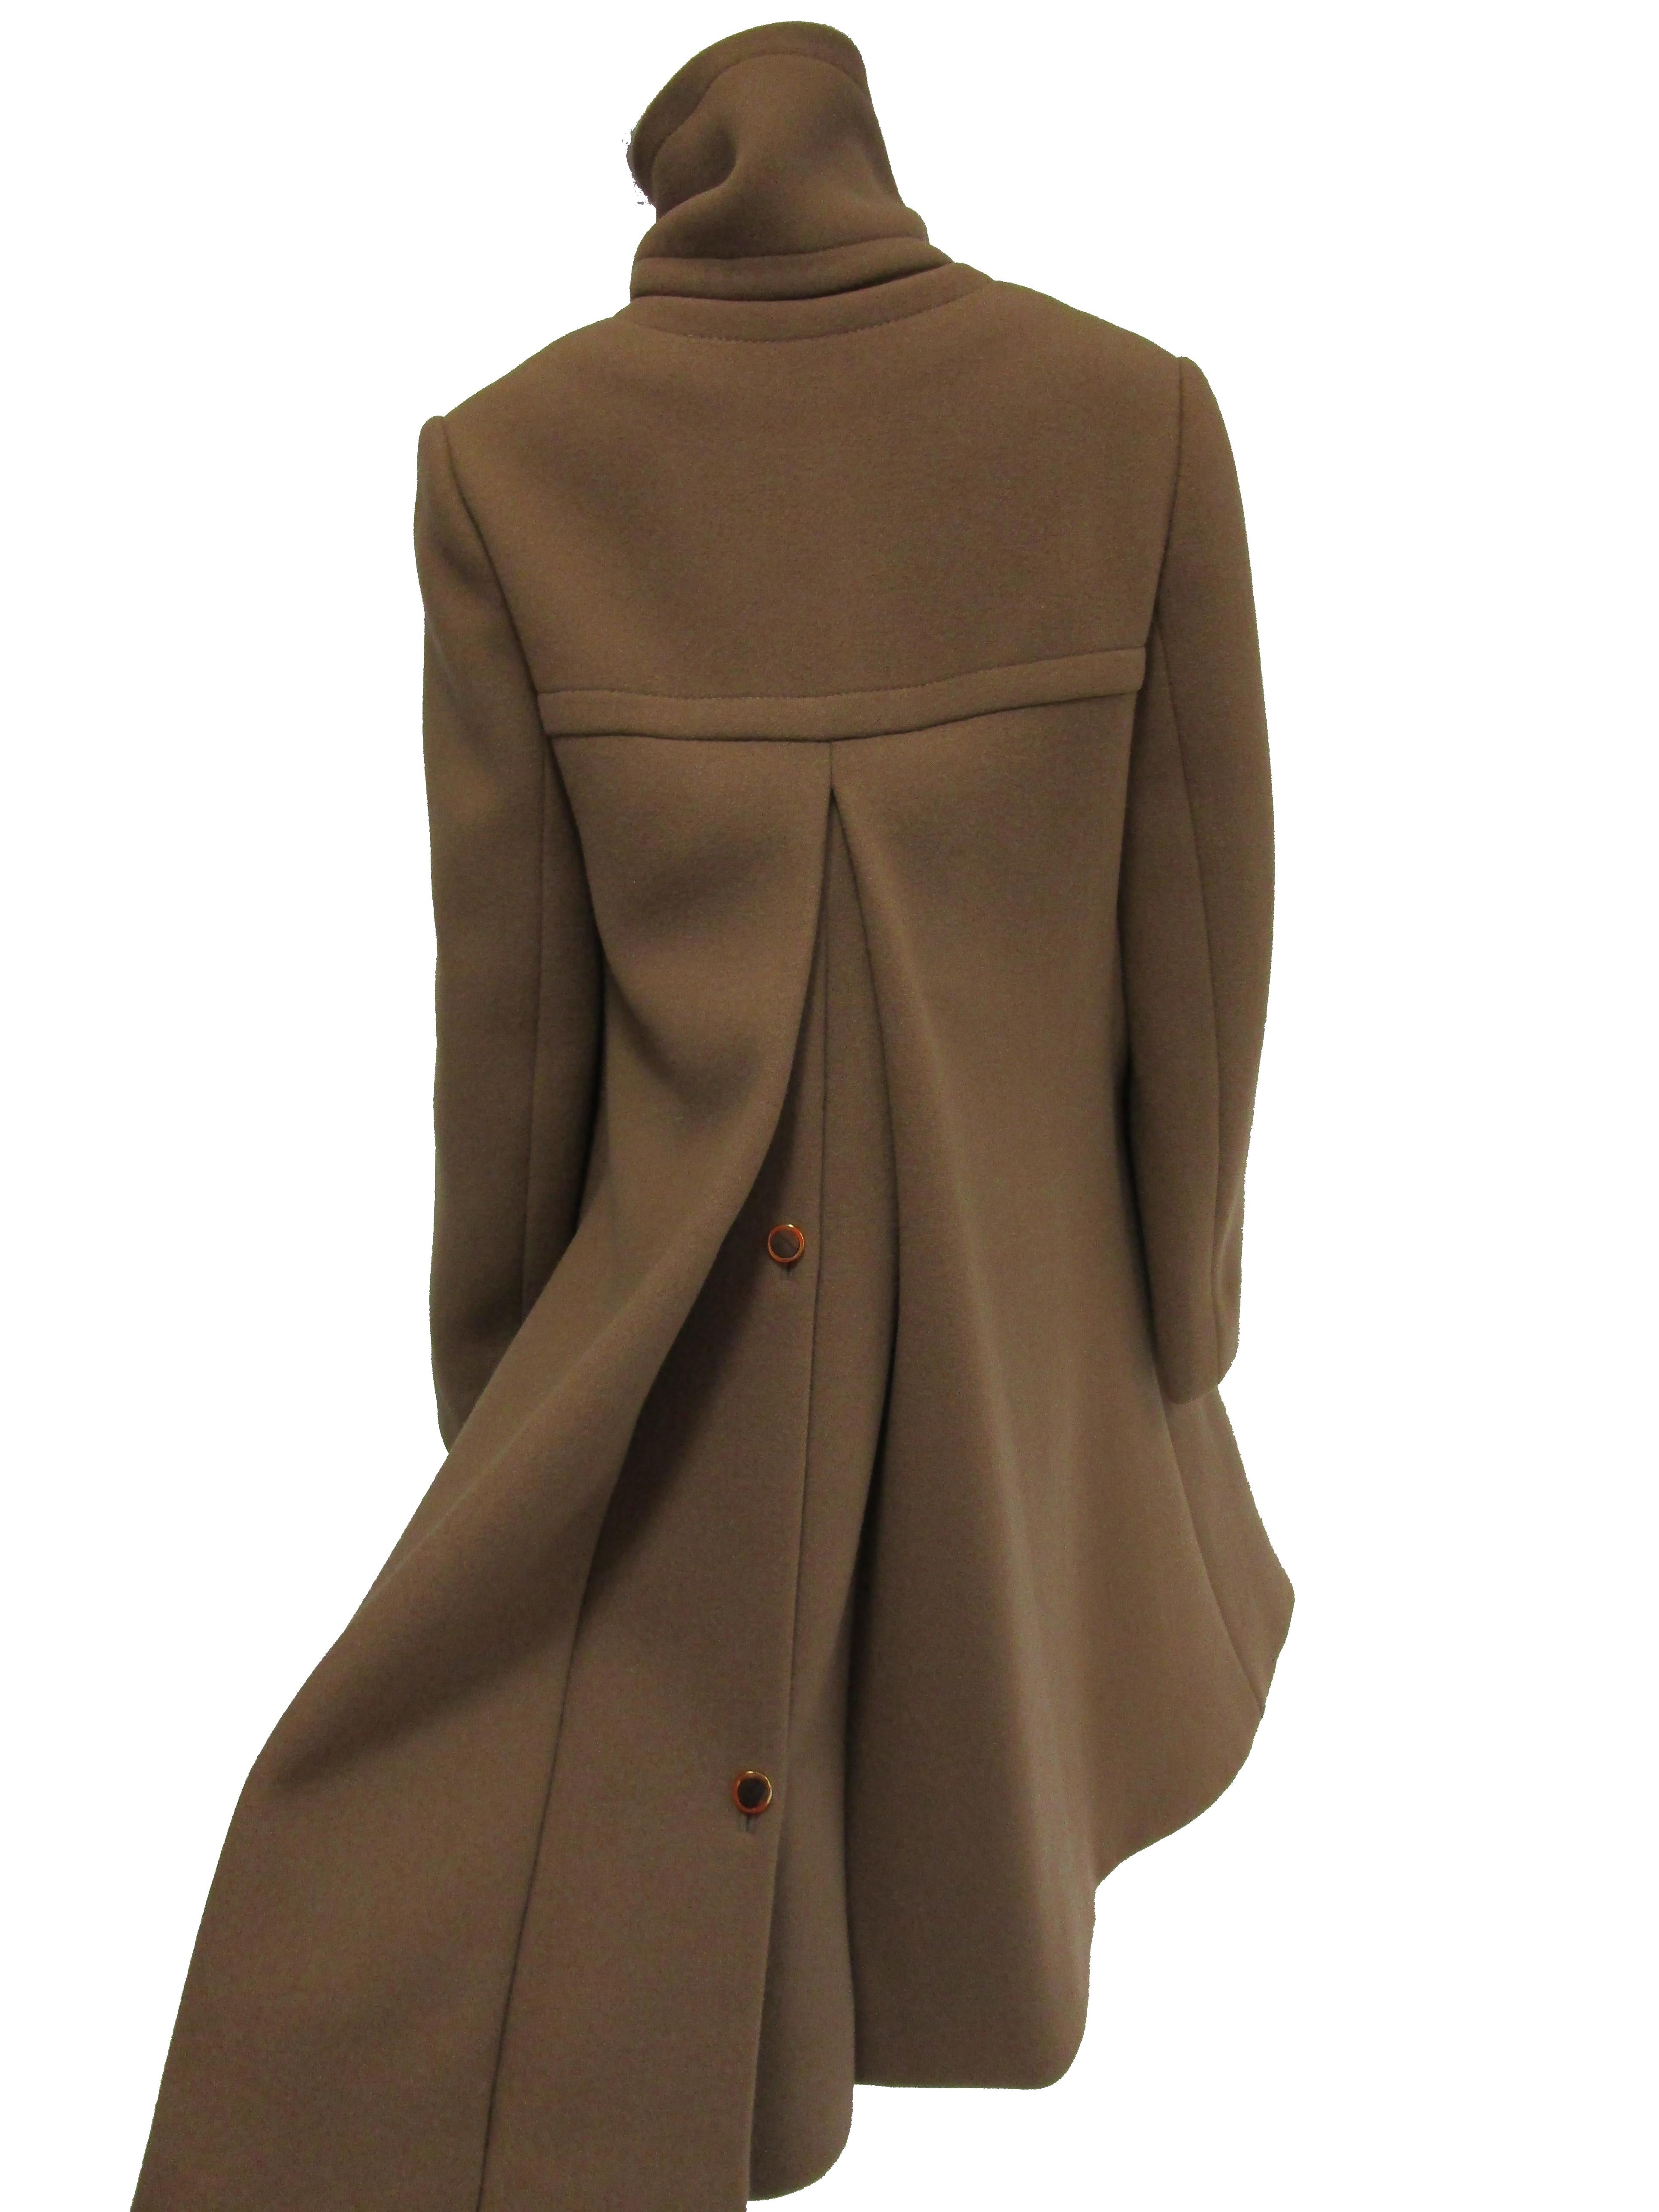 Women's 1970s Galanos Brown Wool Coat with Pleat Detail and Wooden Buttons